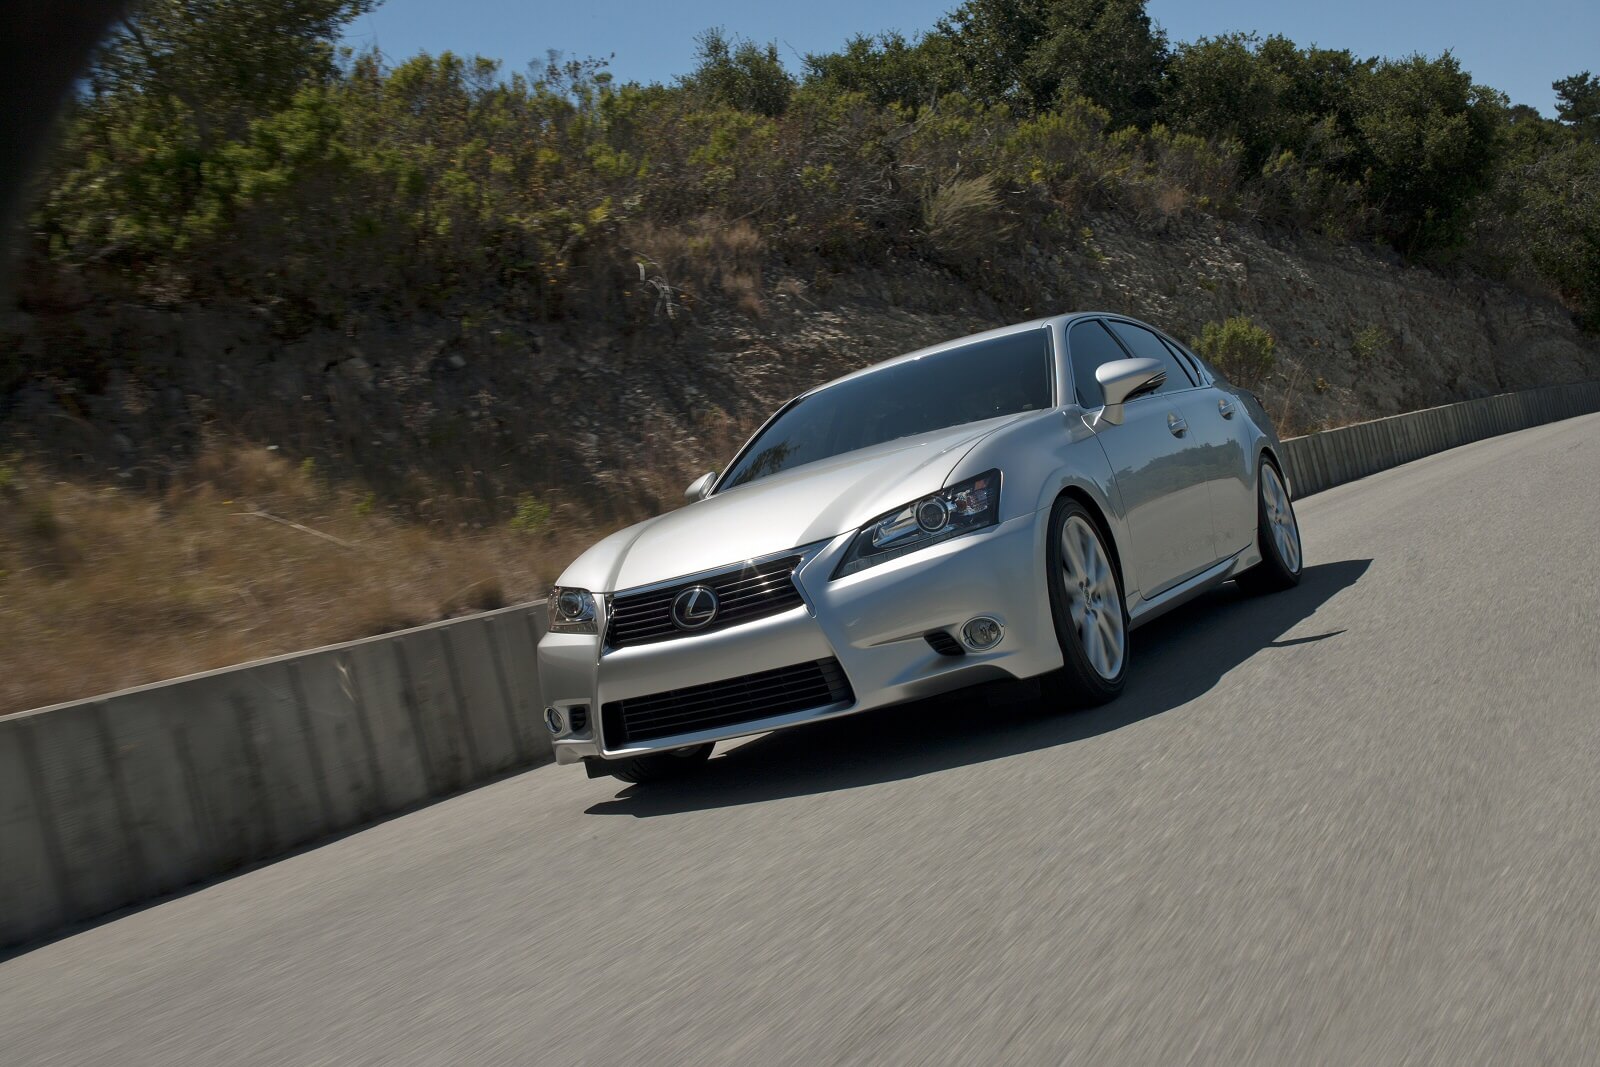 How reliable is Lexus? An honest assessment of the luxury brand